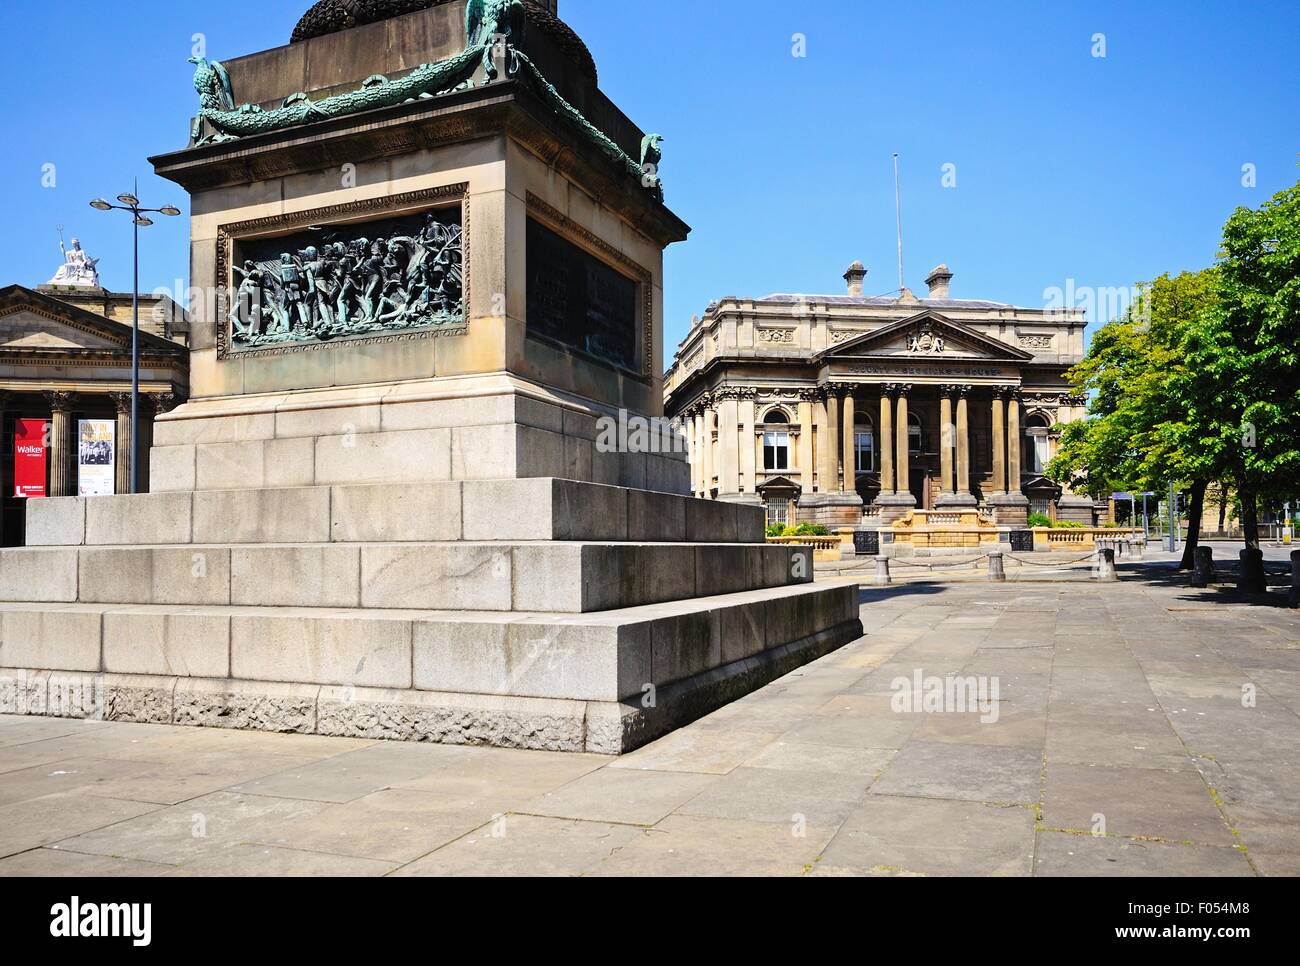 Base of Wellingtons column and County Sessions Court House, Liverpool, Merseyside, England, UK, Western Europe. Stock Photo